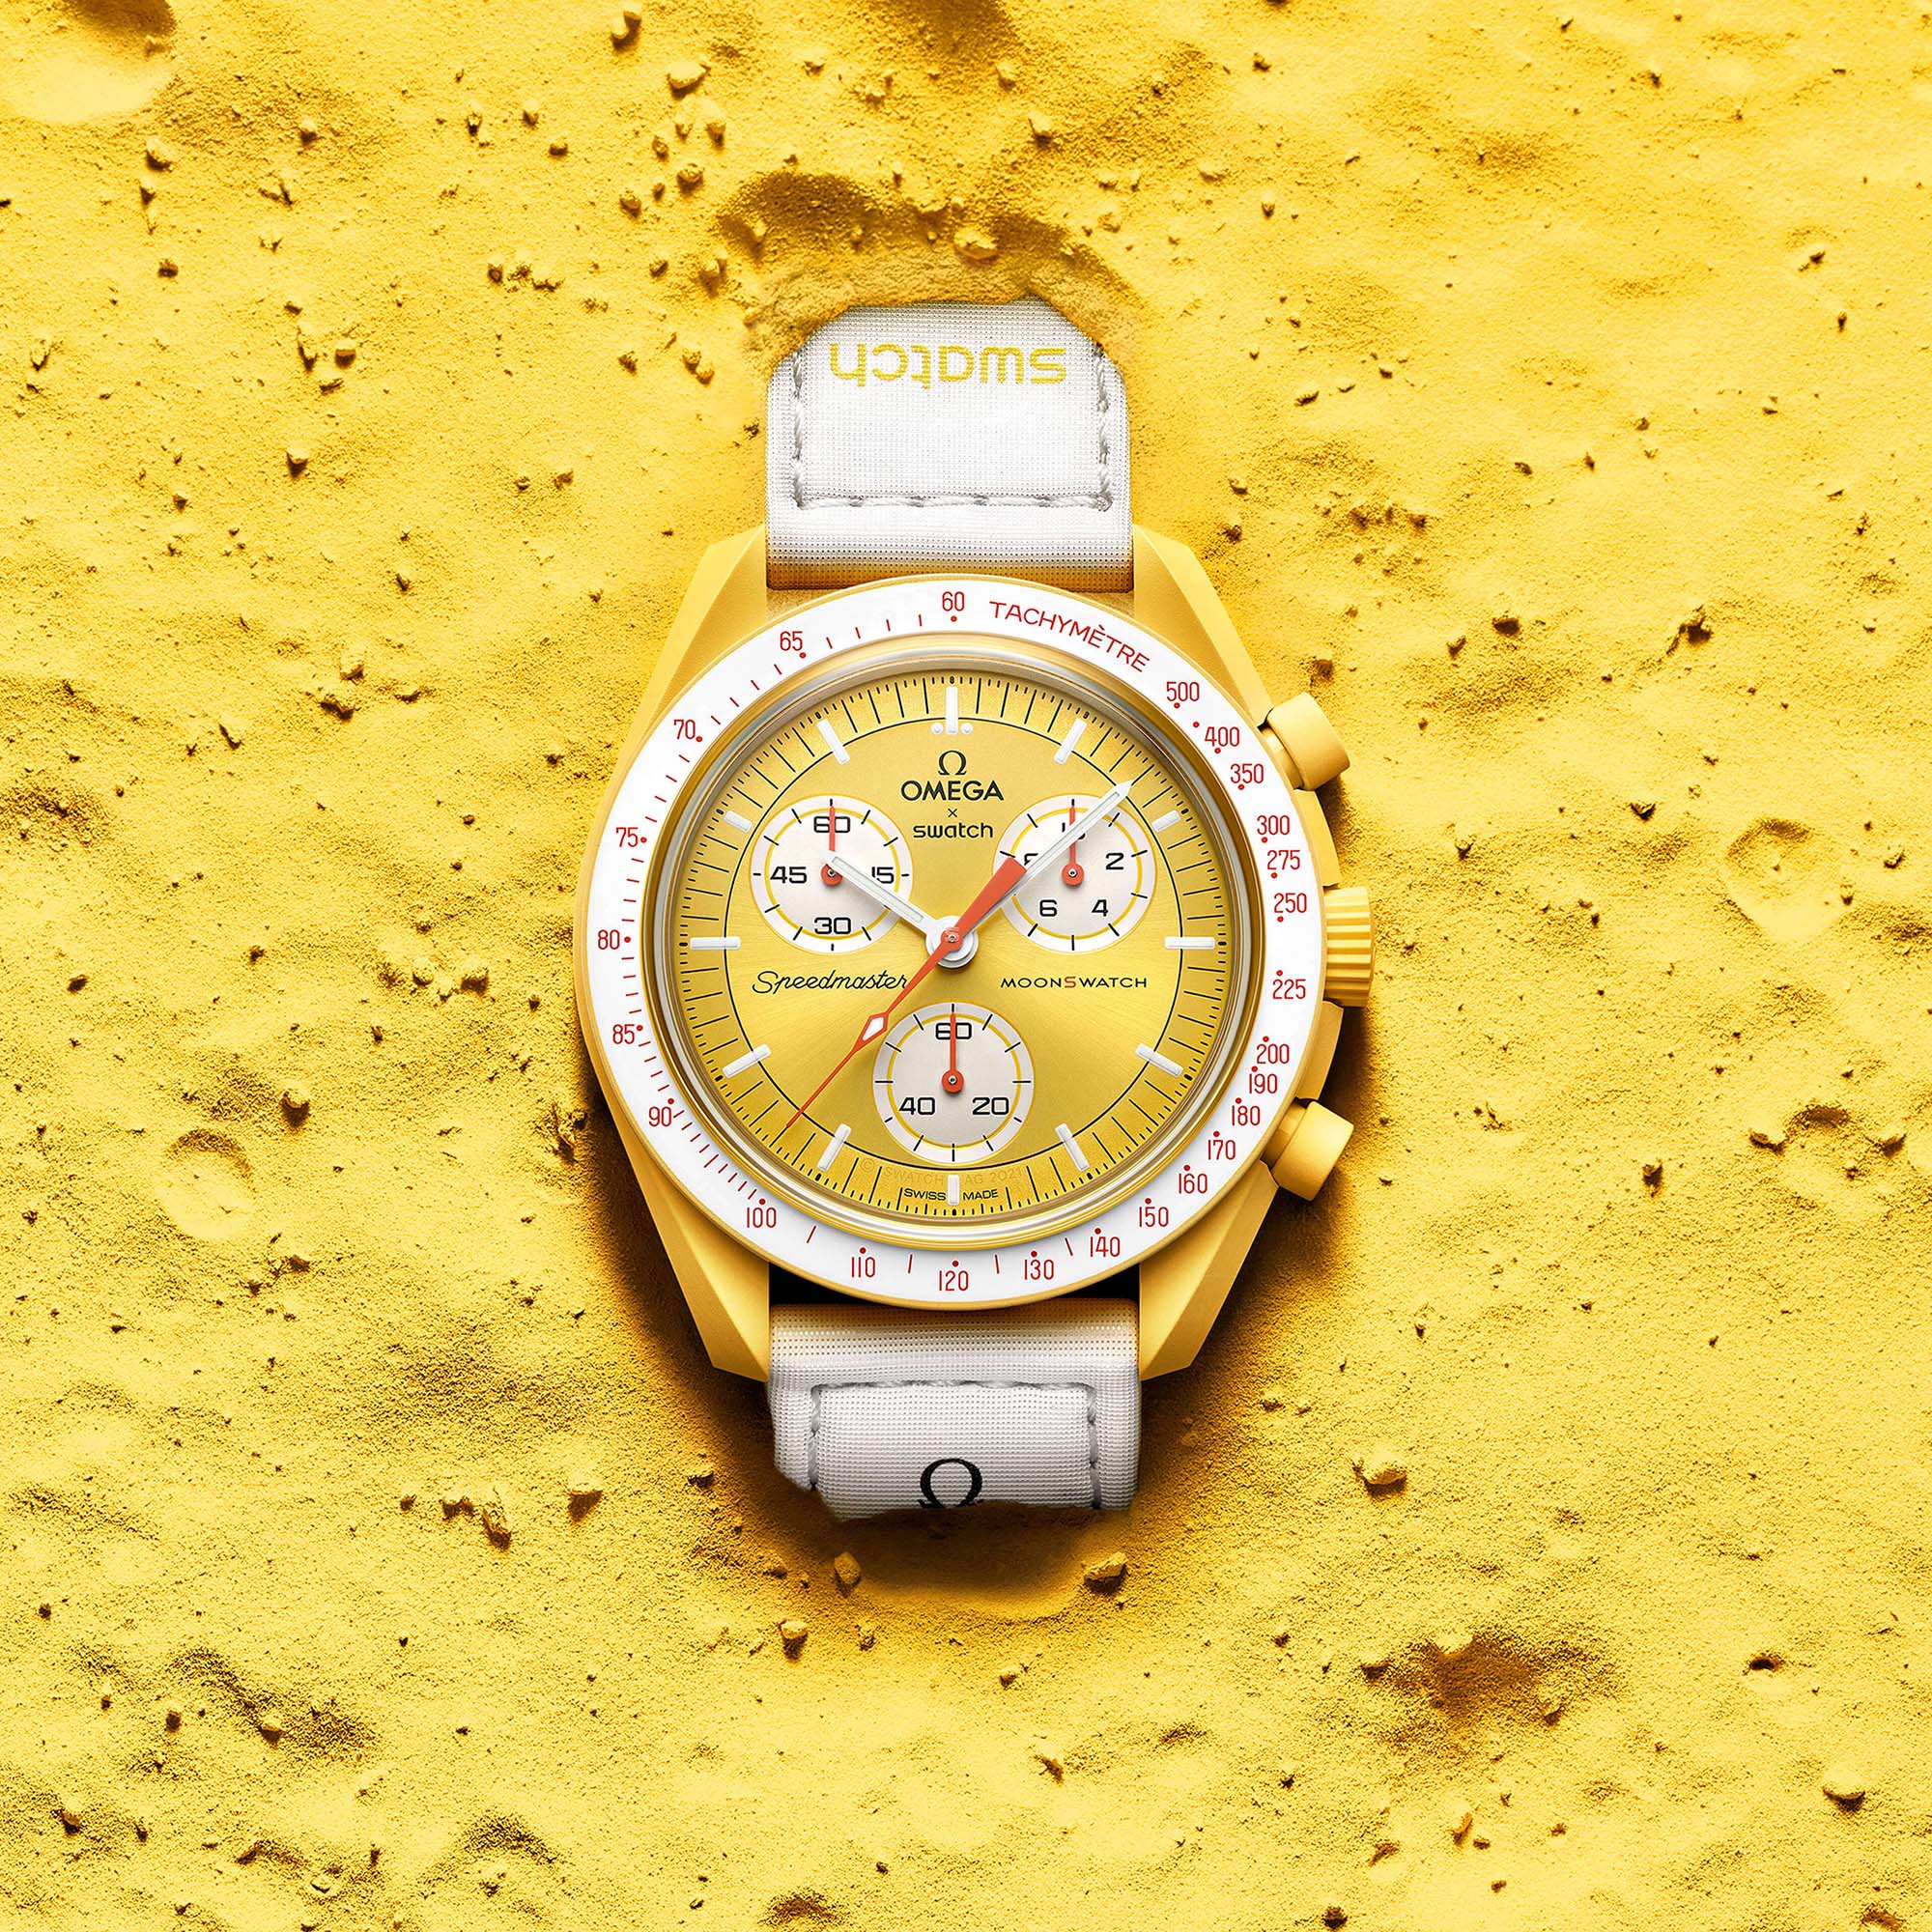 OMEGA x Swatch Archives | Calibre Magazine